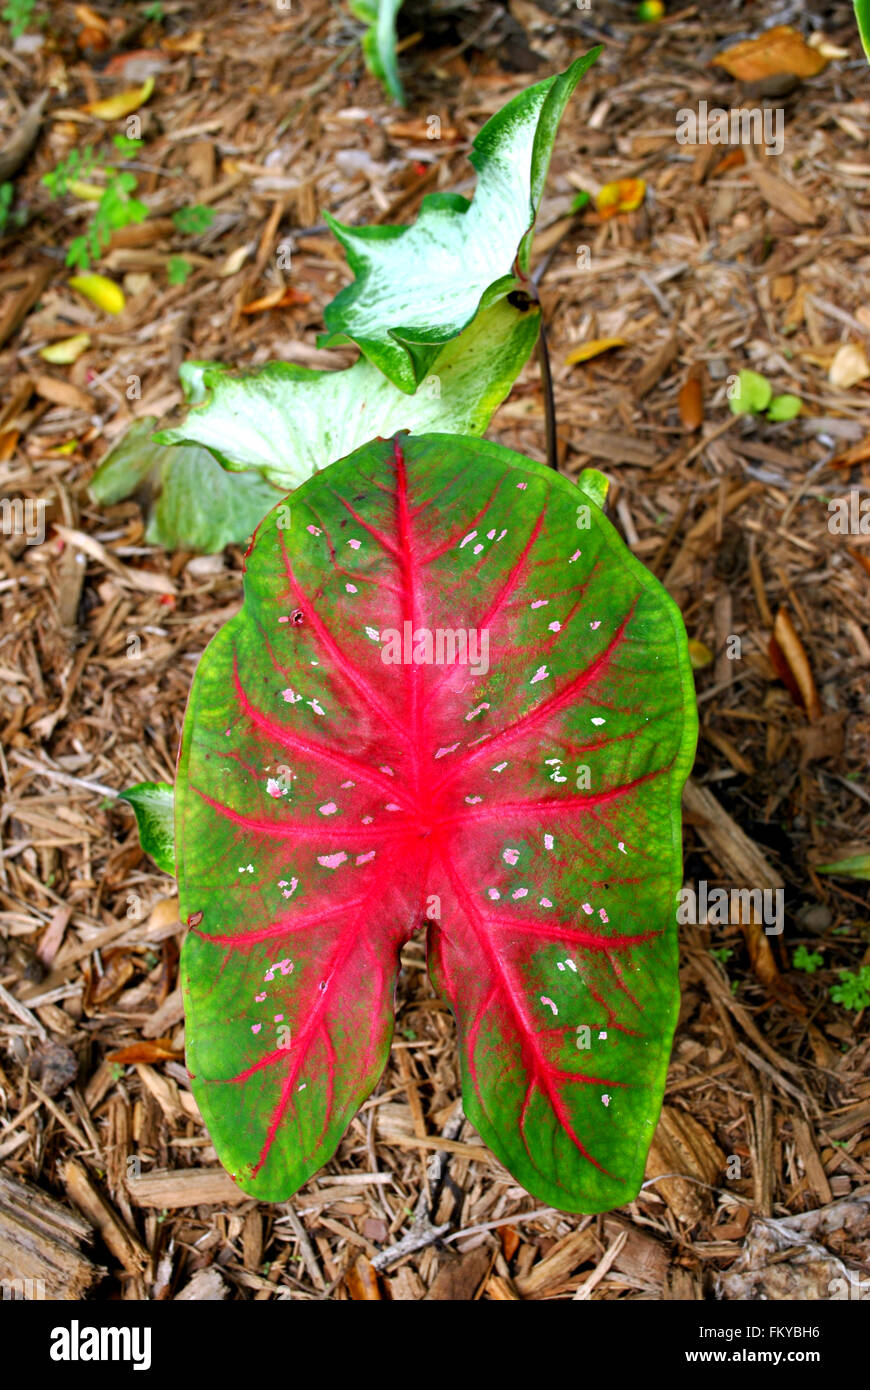 Angle wings Latin name Caladium bicolour. A decorative plant with red and green leaves. Stock Photo